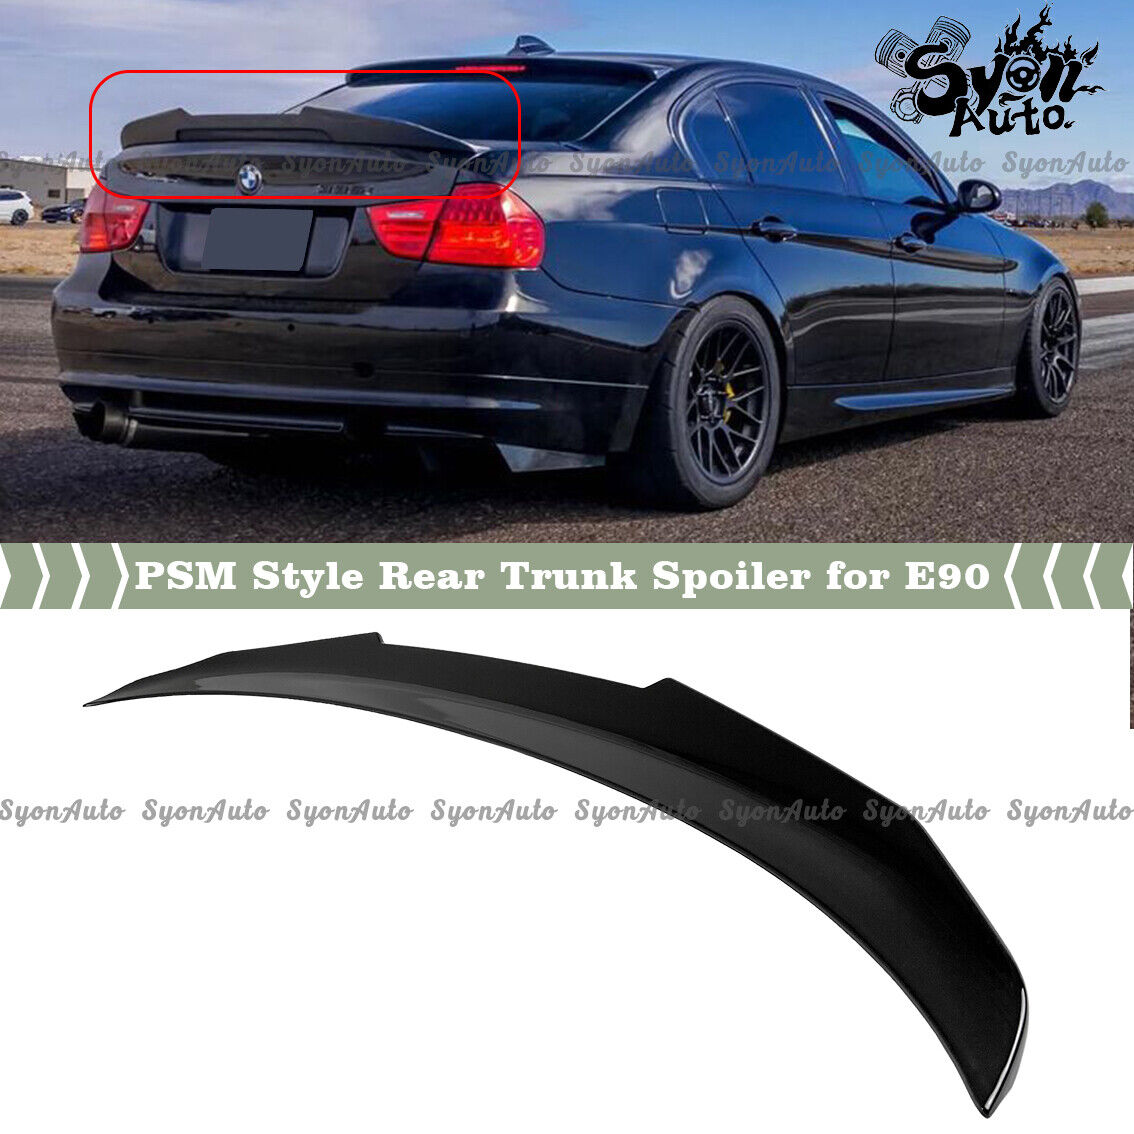 FITS 06-2011 BMW E90 3 SERIES M3 SEDAN GLOSSY BLACK PSM STYLE TRUNK SPOILER WING